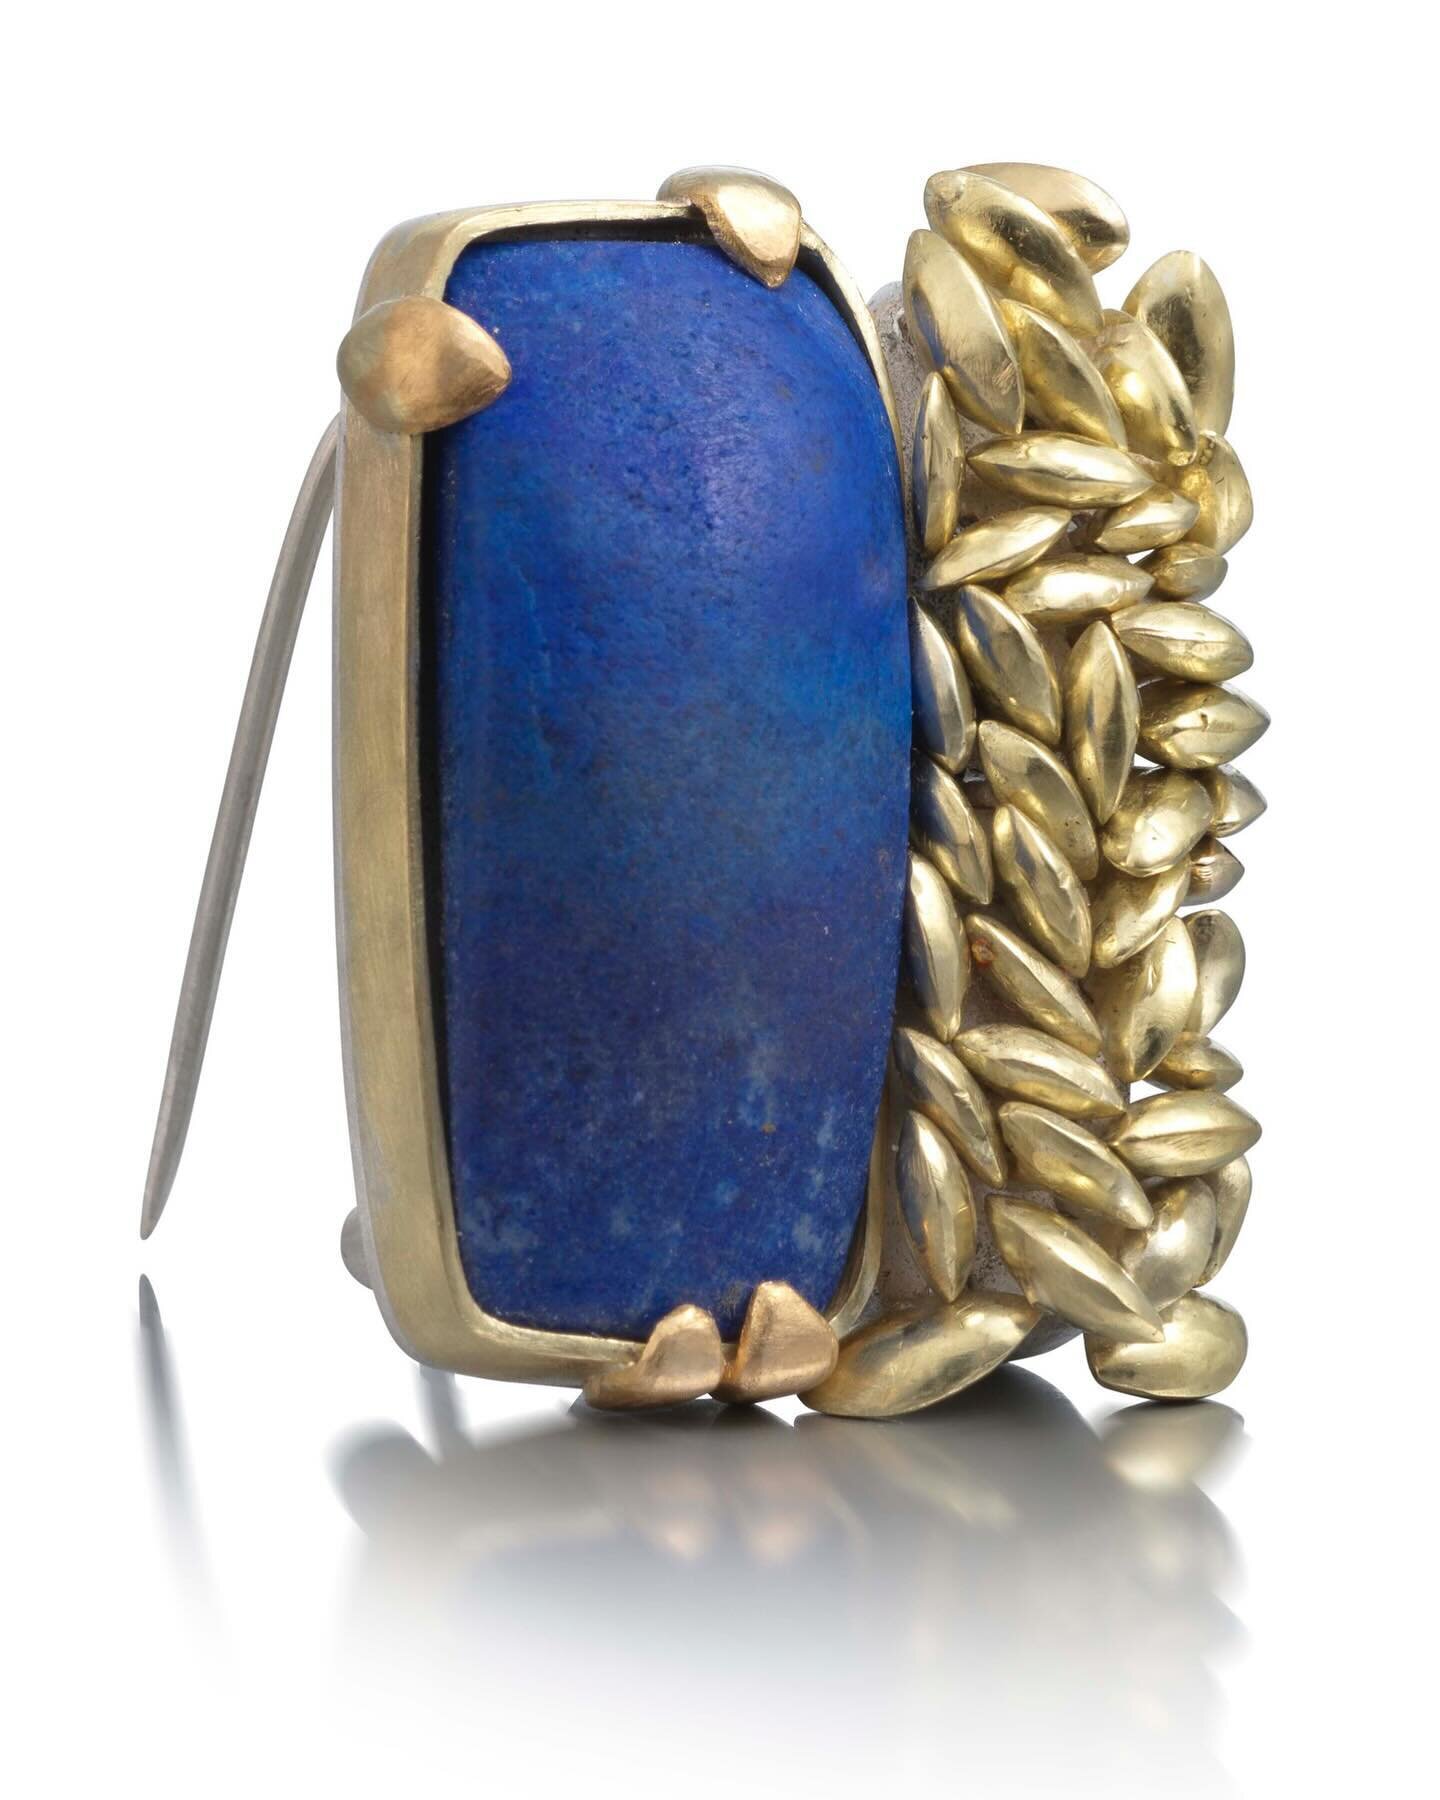 COLLECT 24 - I am so delighted to to have my lapis lazuli and gold seeds brooch amongst 100 brooches from other makers which must be one of the biggest brooch displays ever! It will be  @goldsmithsfair stand at 

COLLECT ART FAIR, Somerset House 
thi